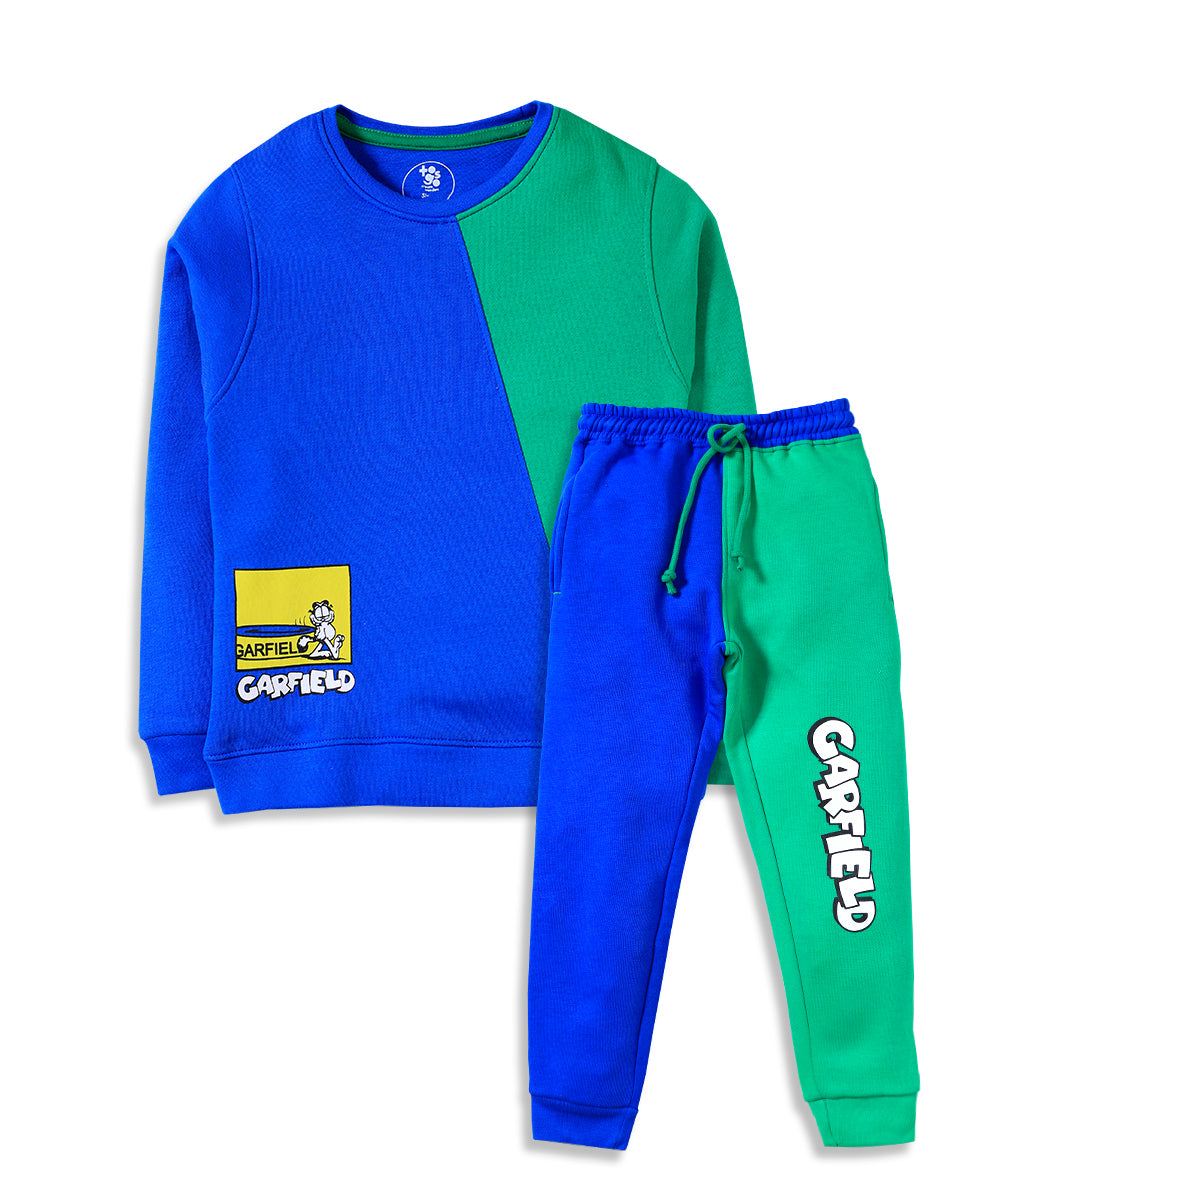 Garfield Navy and Green Track Suit